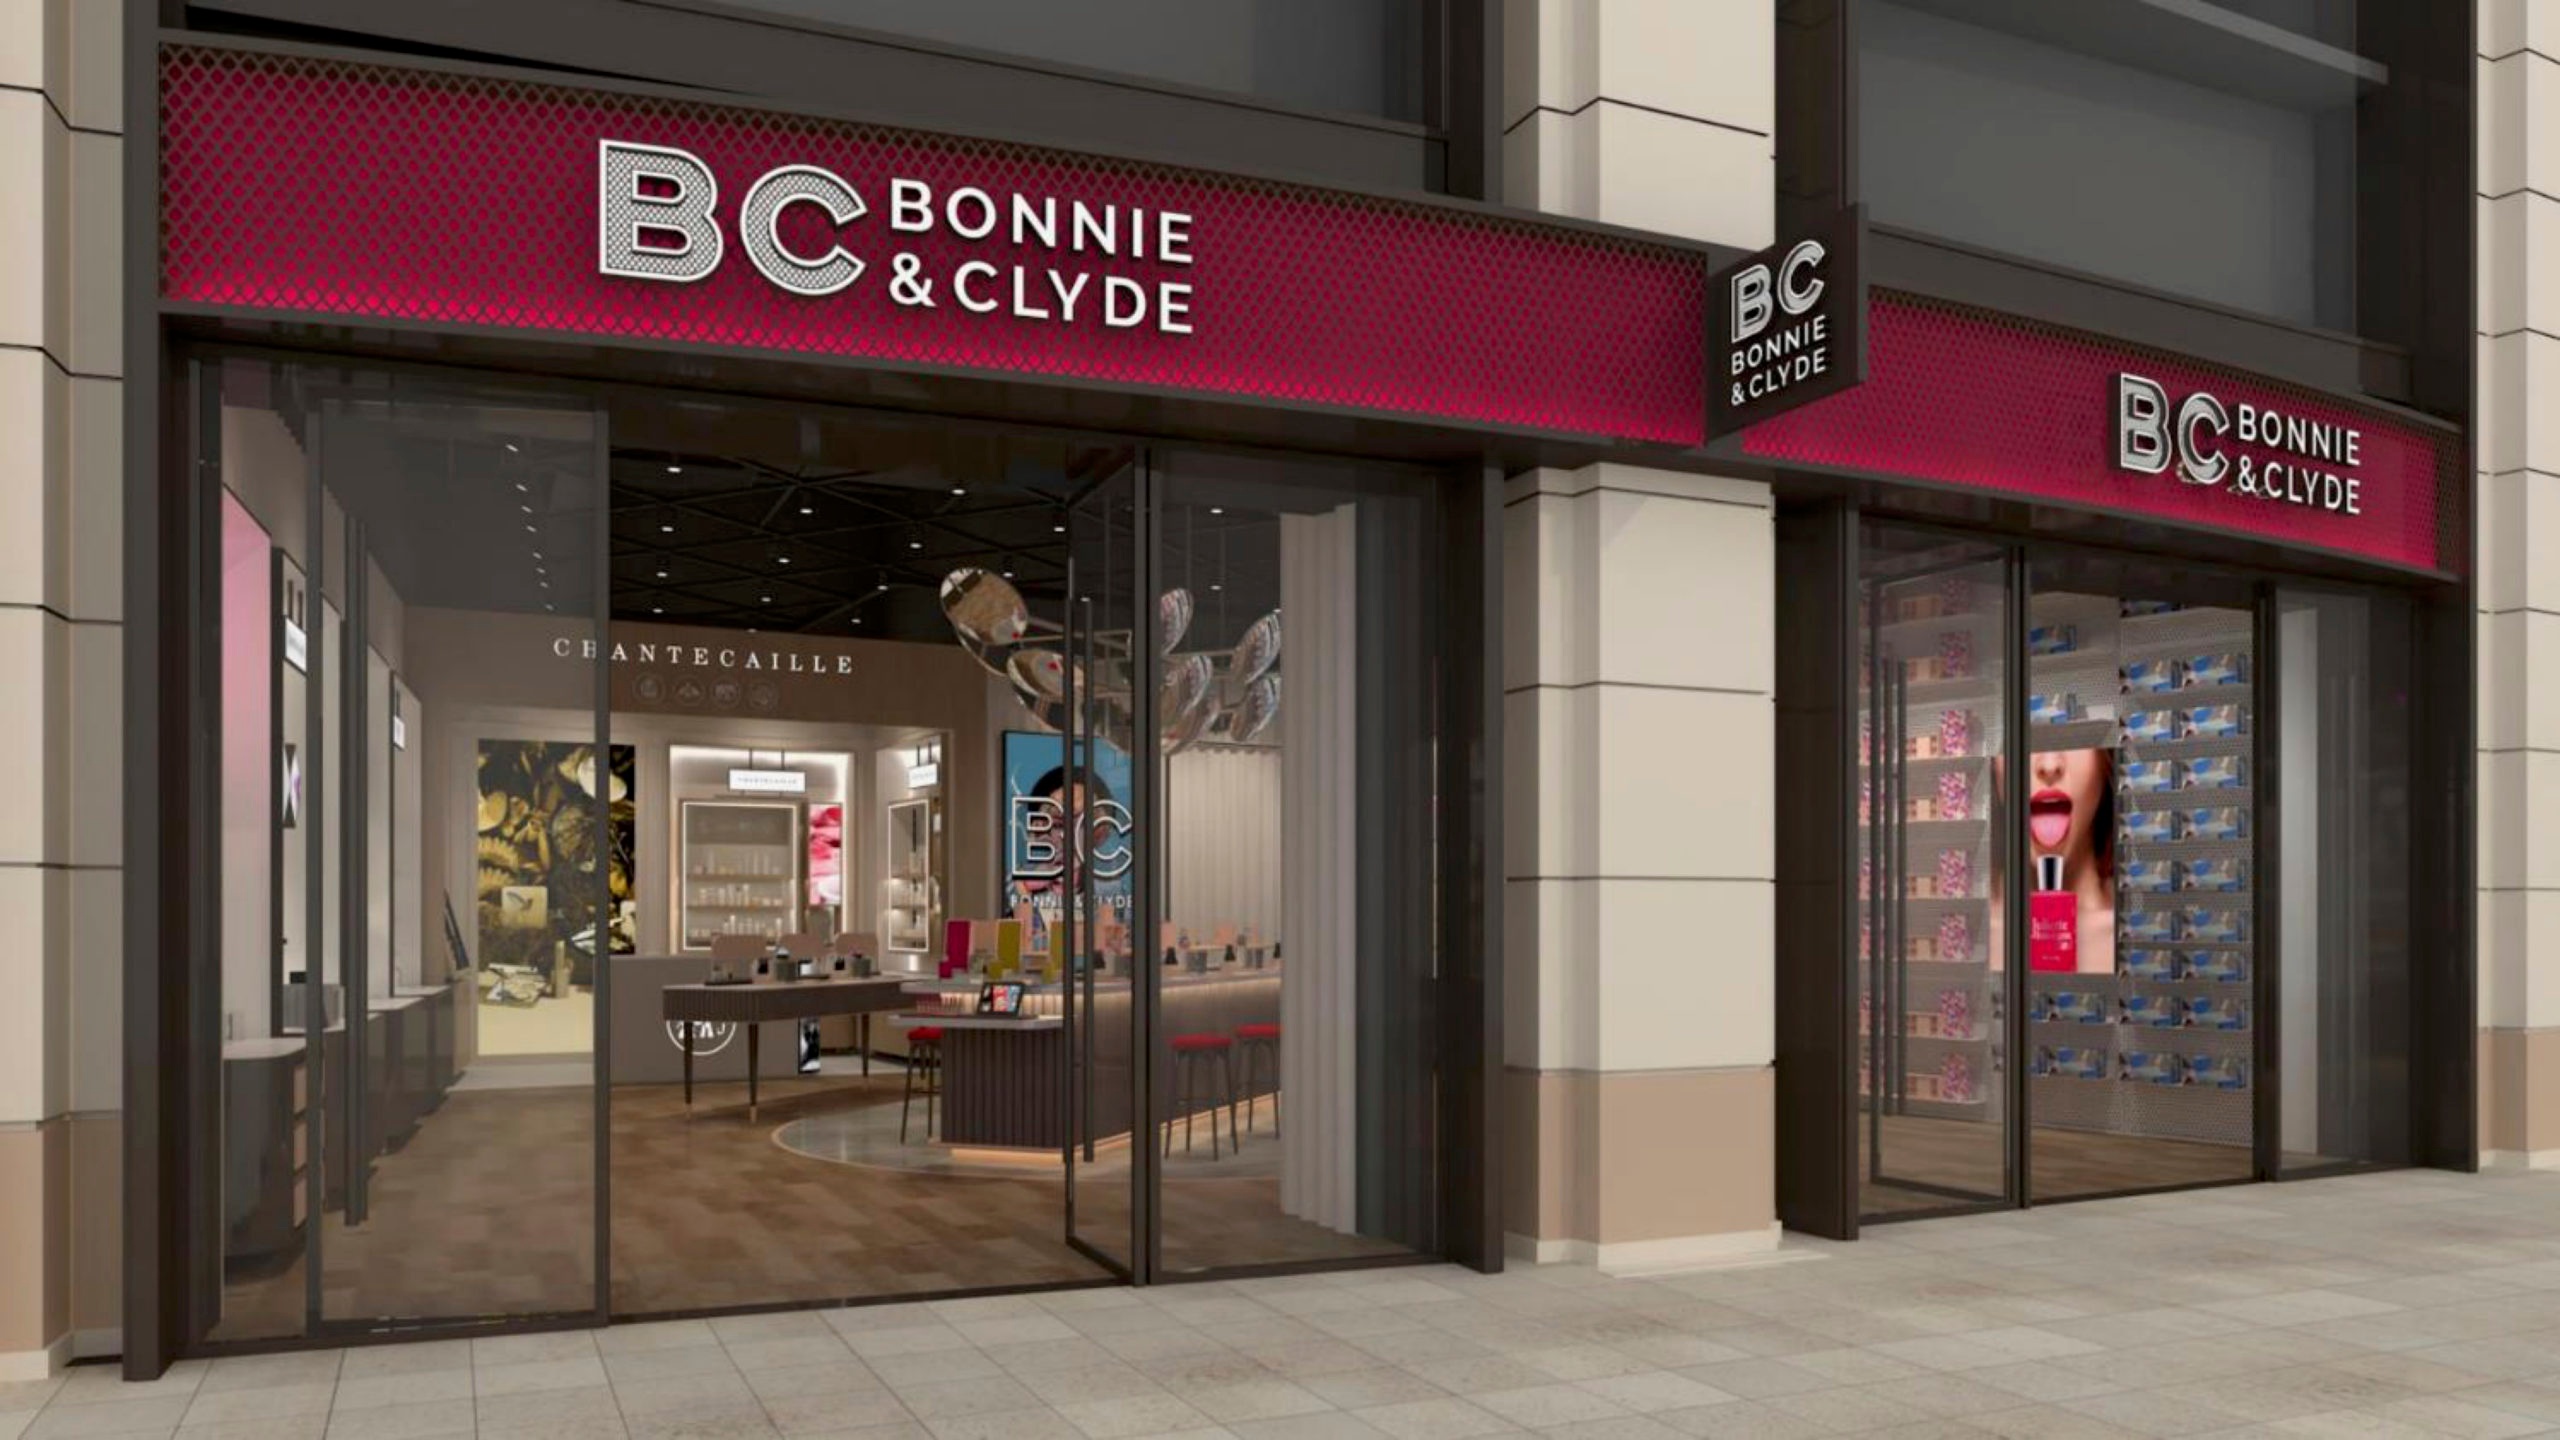 The sleek storefront of Bonnie & Clyde's shop at HKRI Taikoo Hui. Photo: Bonnie & Clyde.